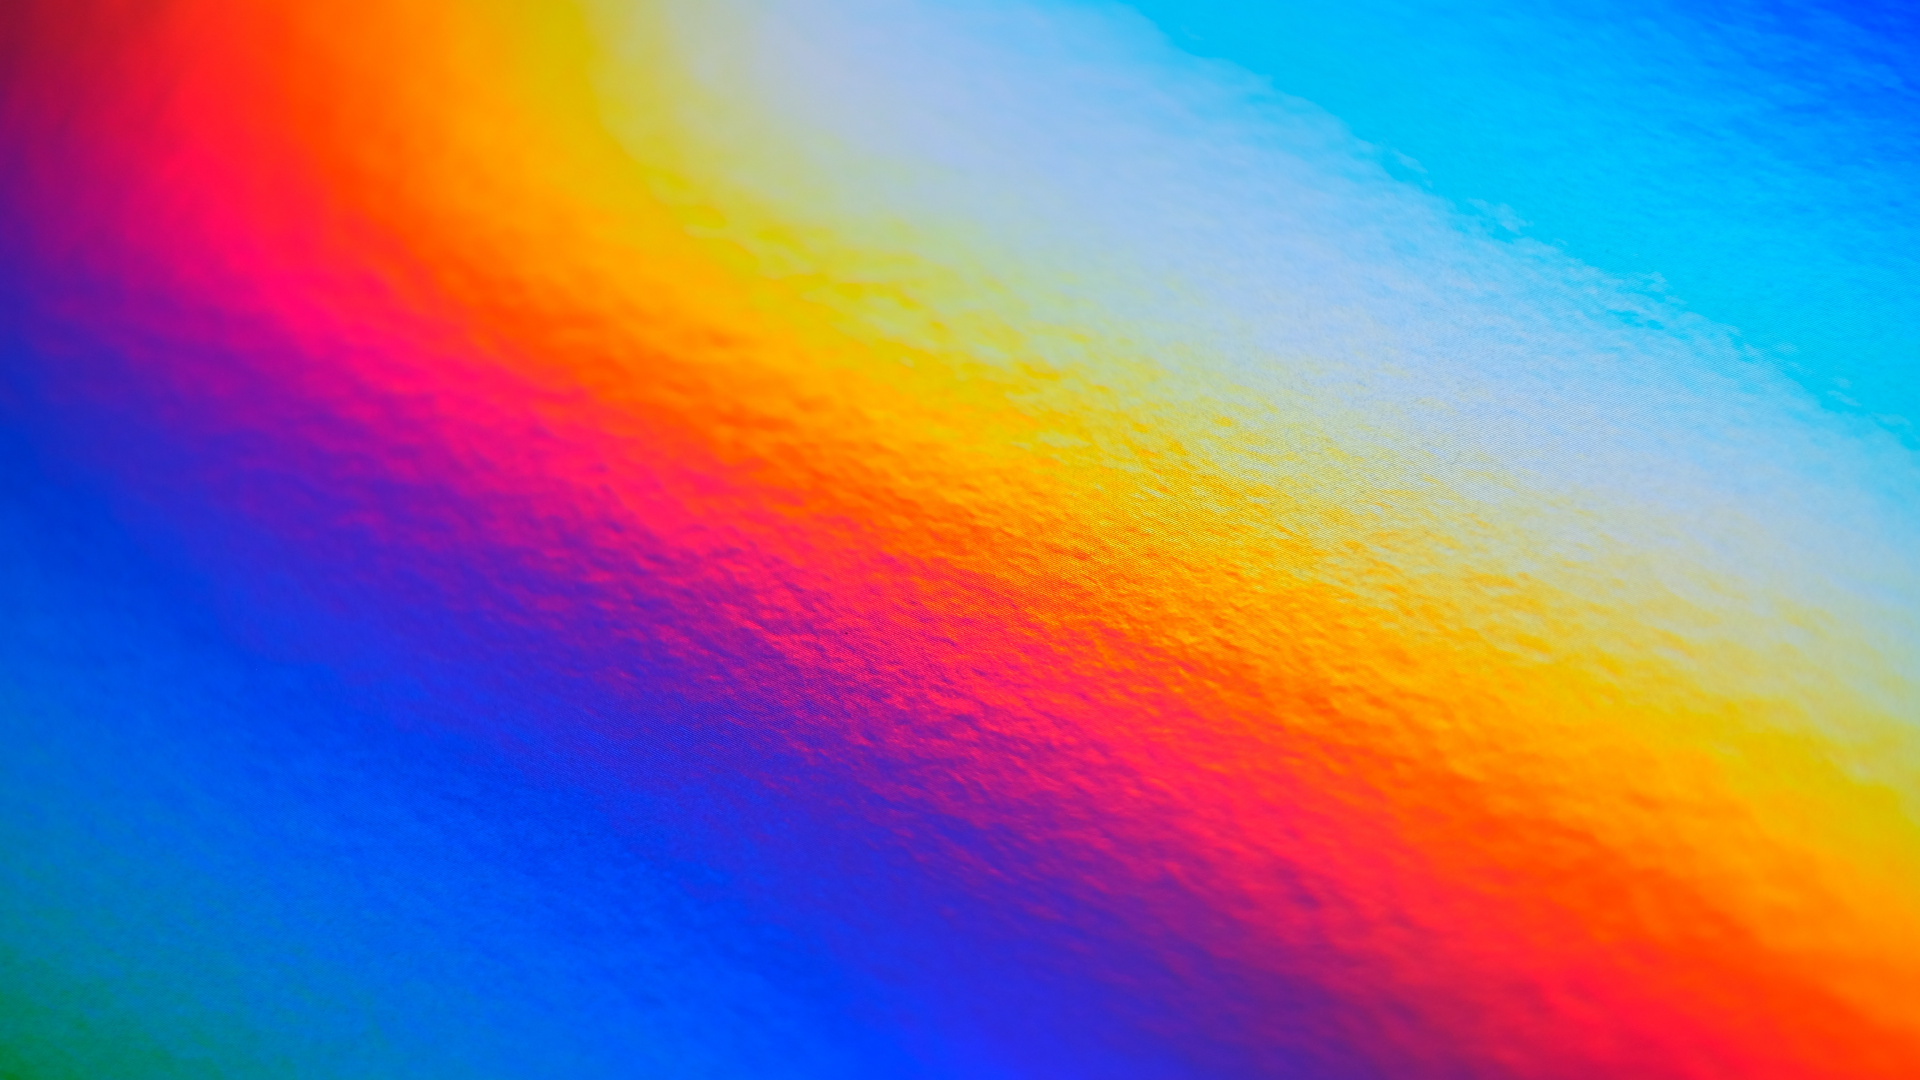 Orange and Blue Abstract Painting. Wallpaper in 1920x1080 Resolution